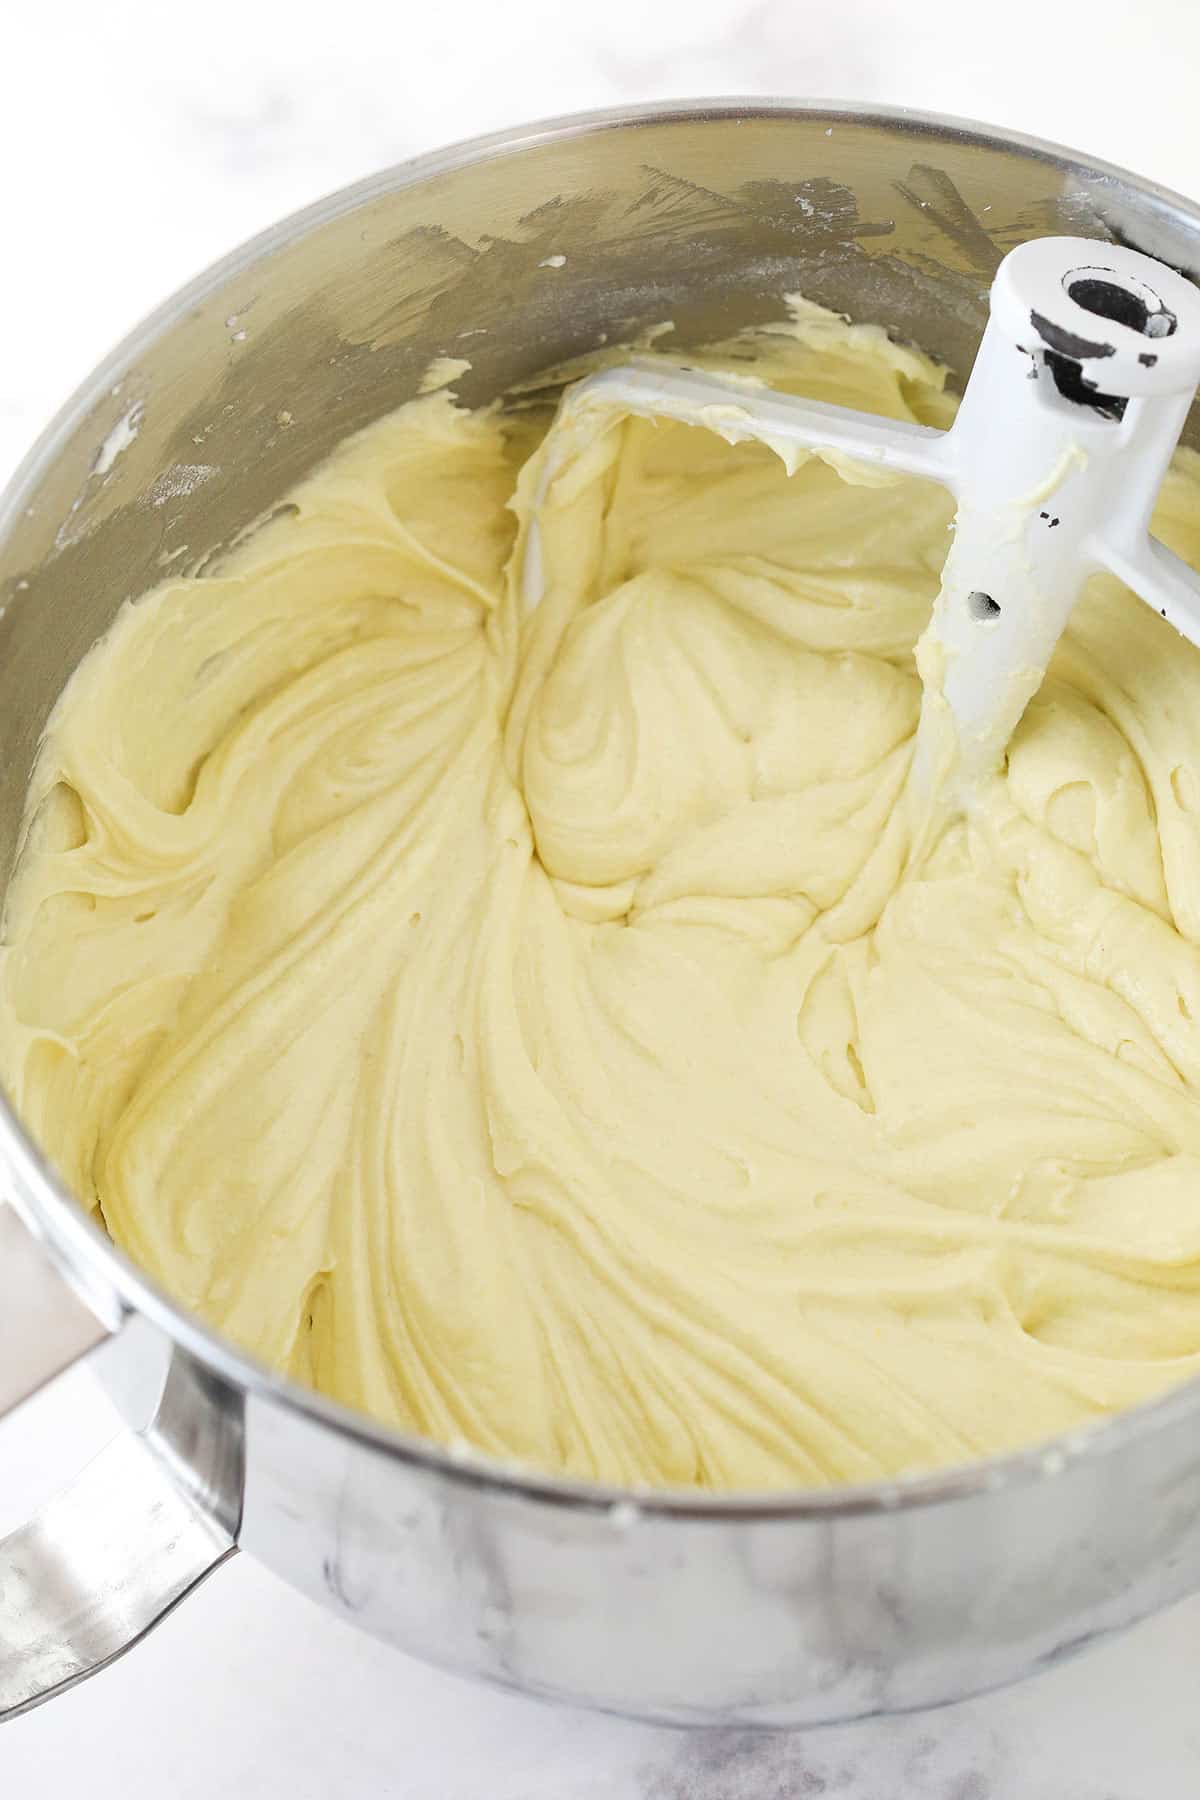 The completed bundt cake batter inside of a metal mixing bowl